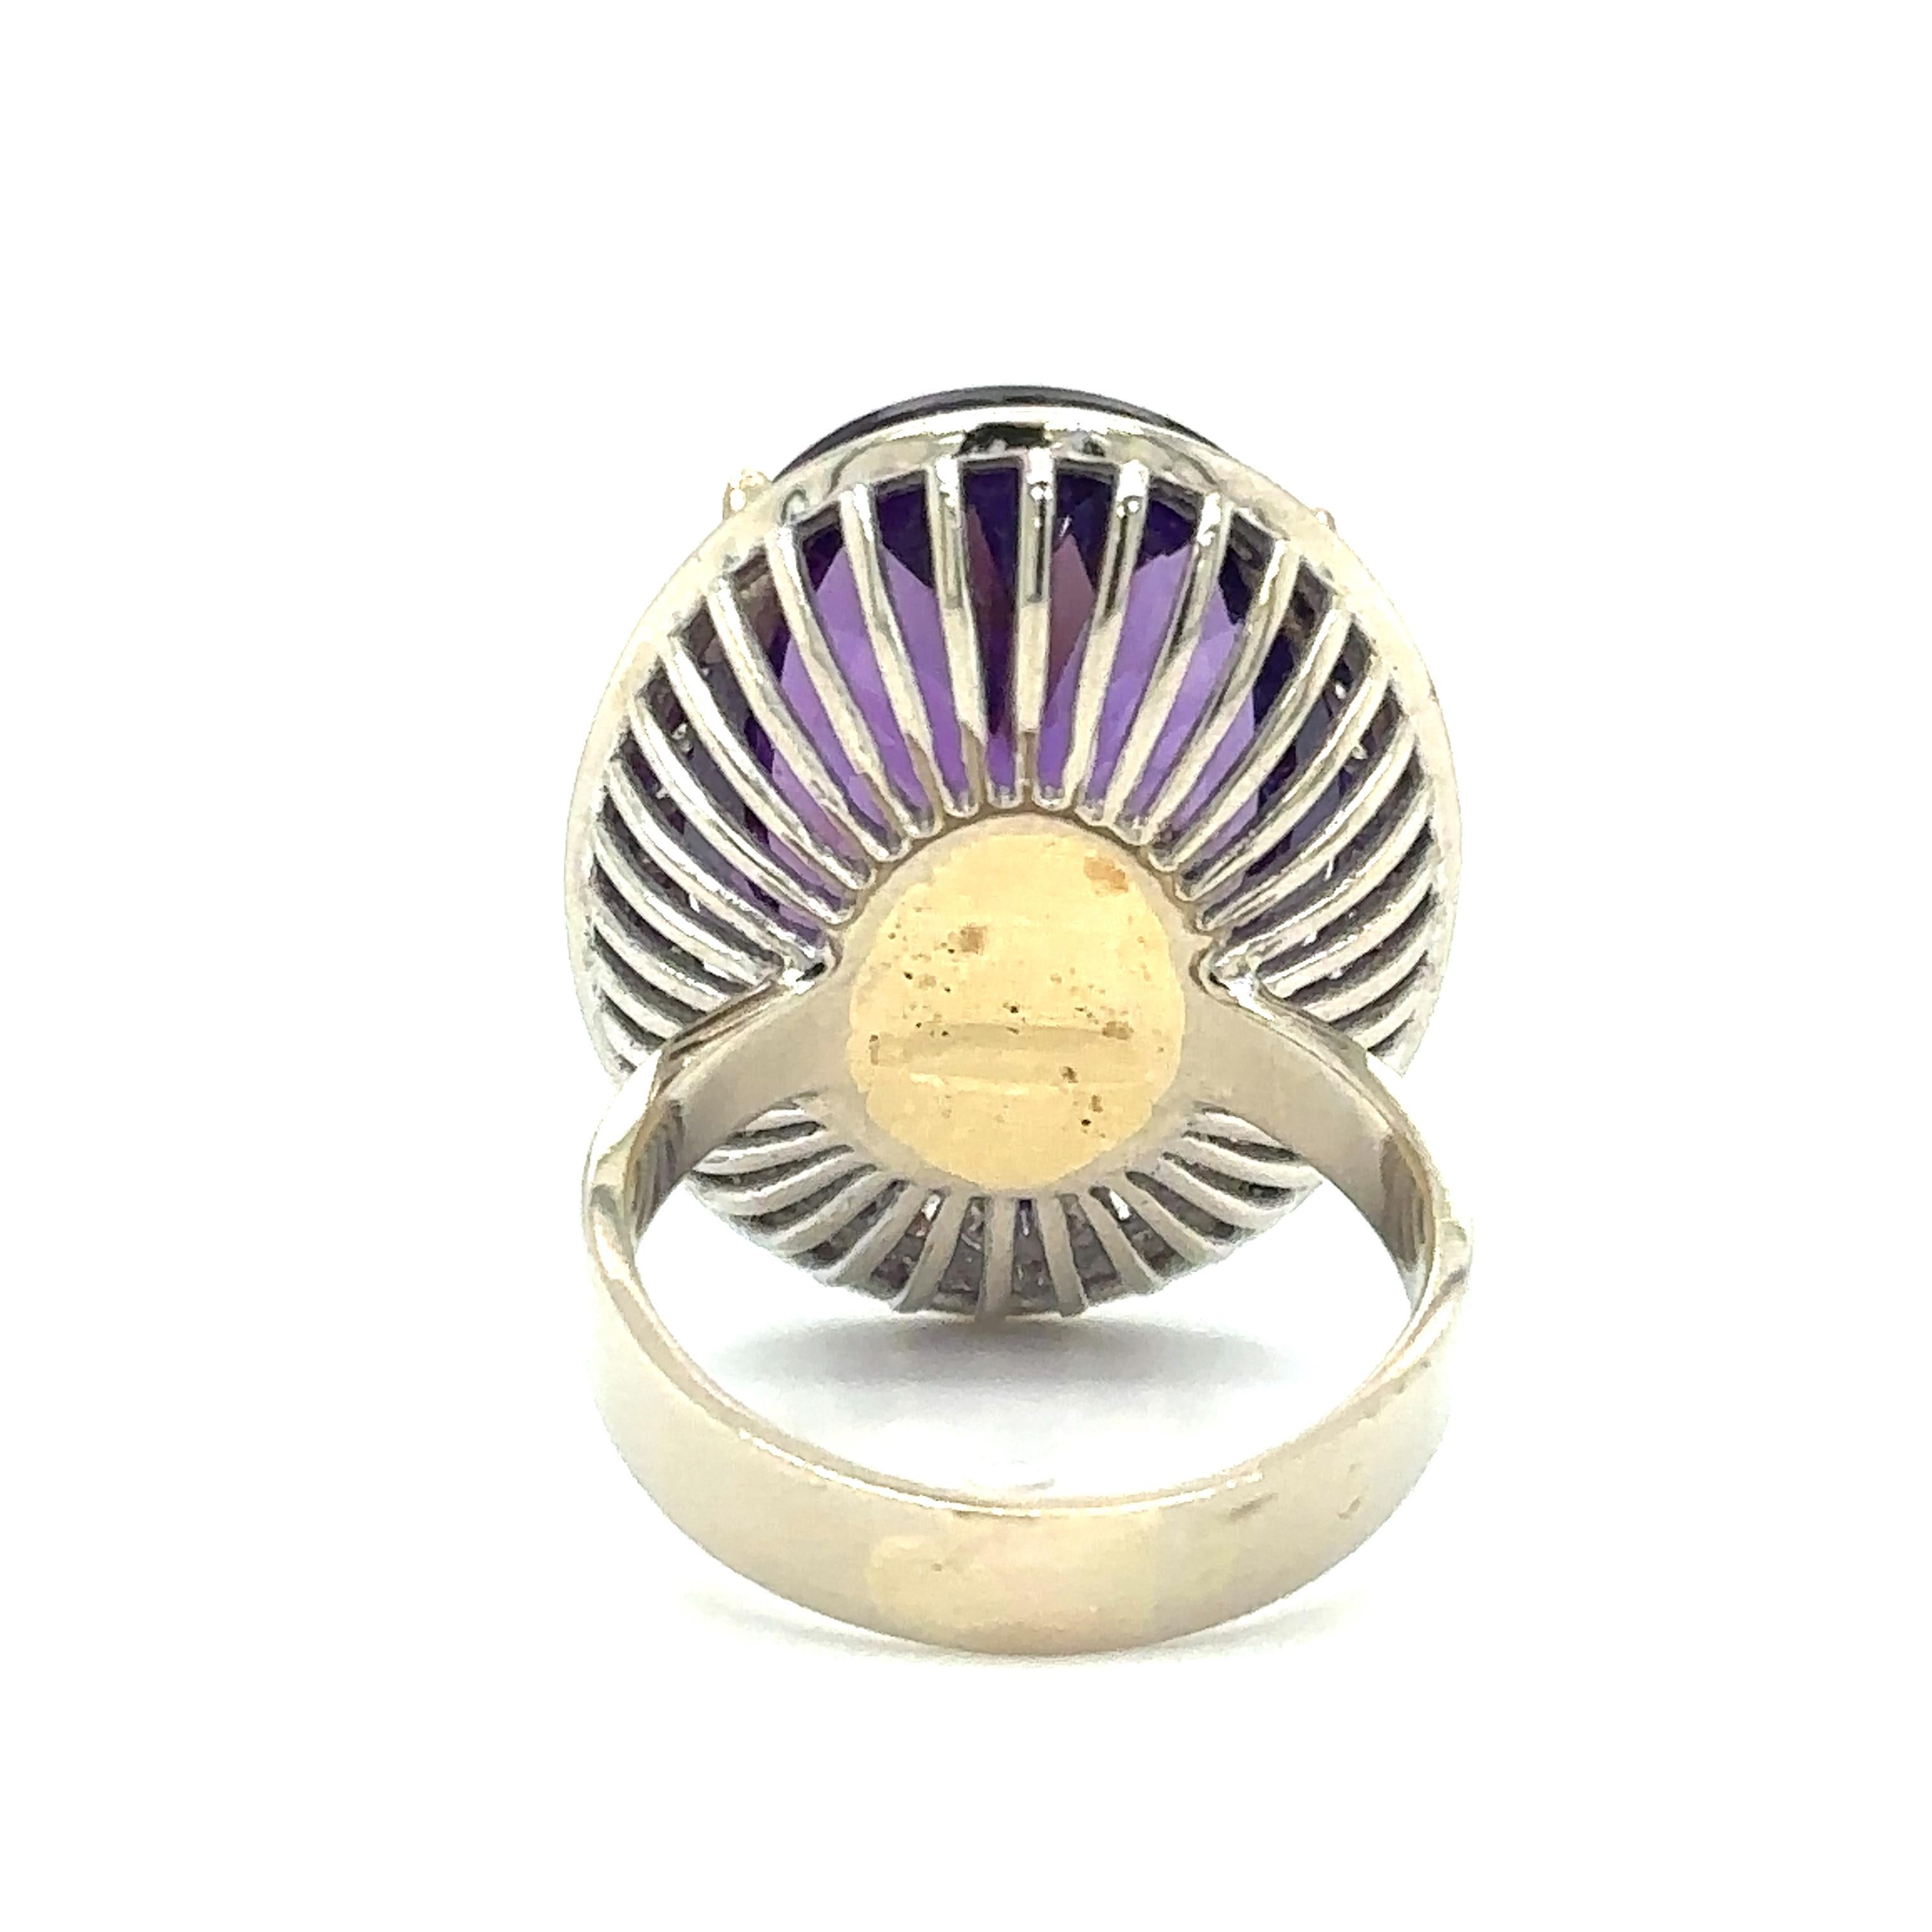 Item Details: This spectacular cocktail ring has a large, vibrant purple brilliant cut amethyst with a halo of diamonds.
The center amethyst is held by 4 talon prongs, crafted in 14 karat yellow gold. The remainder of the ring is crafted in 14 karat